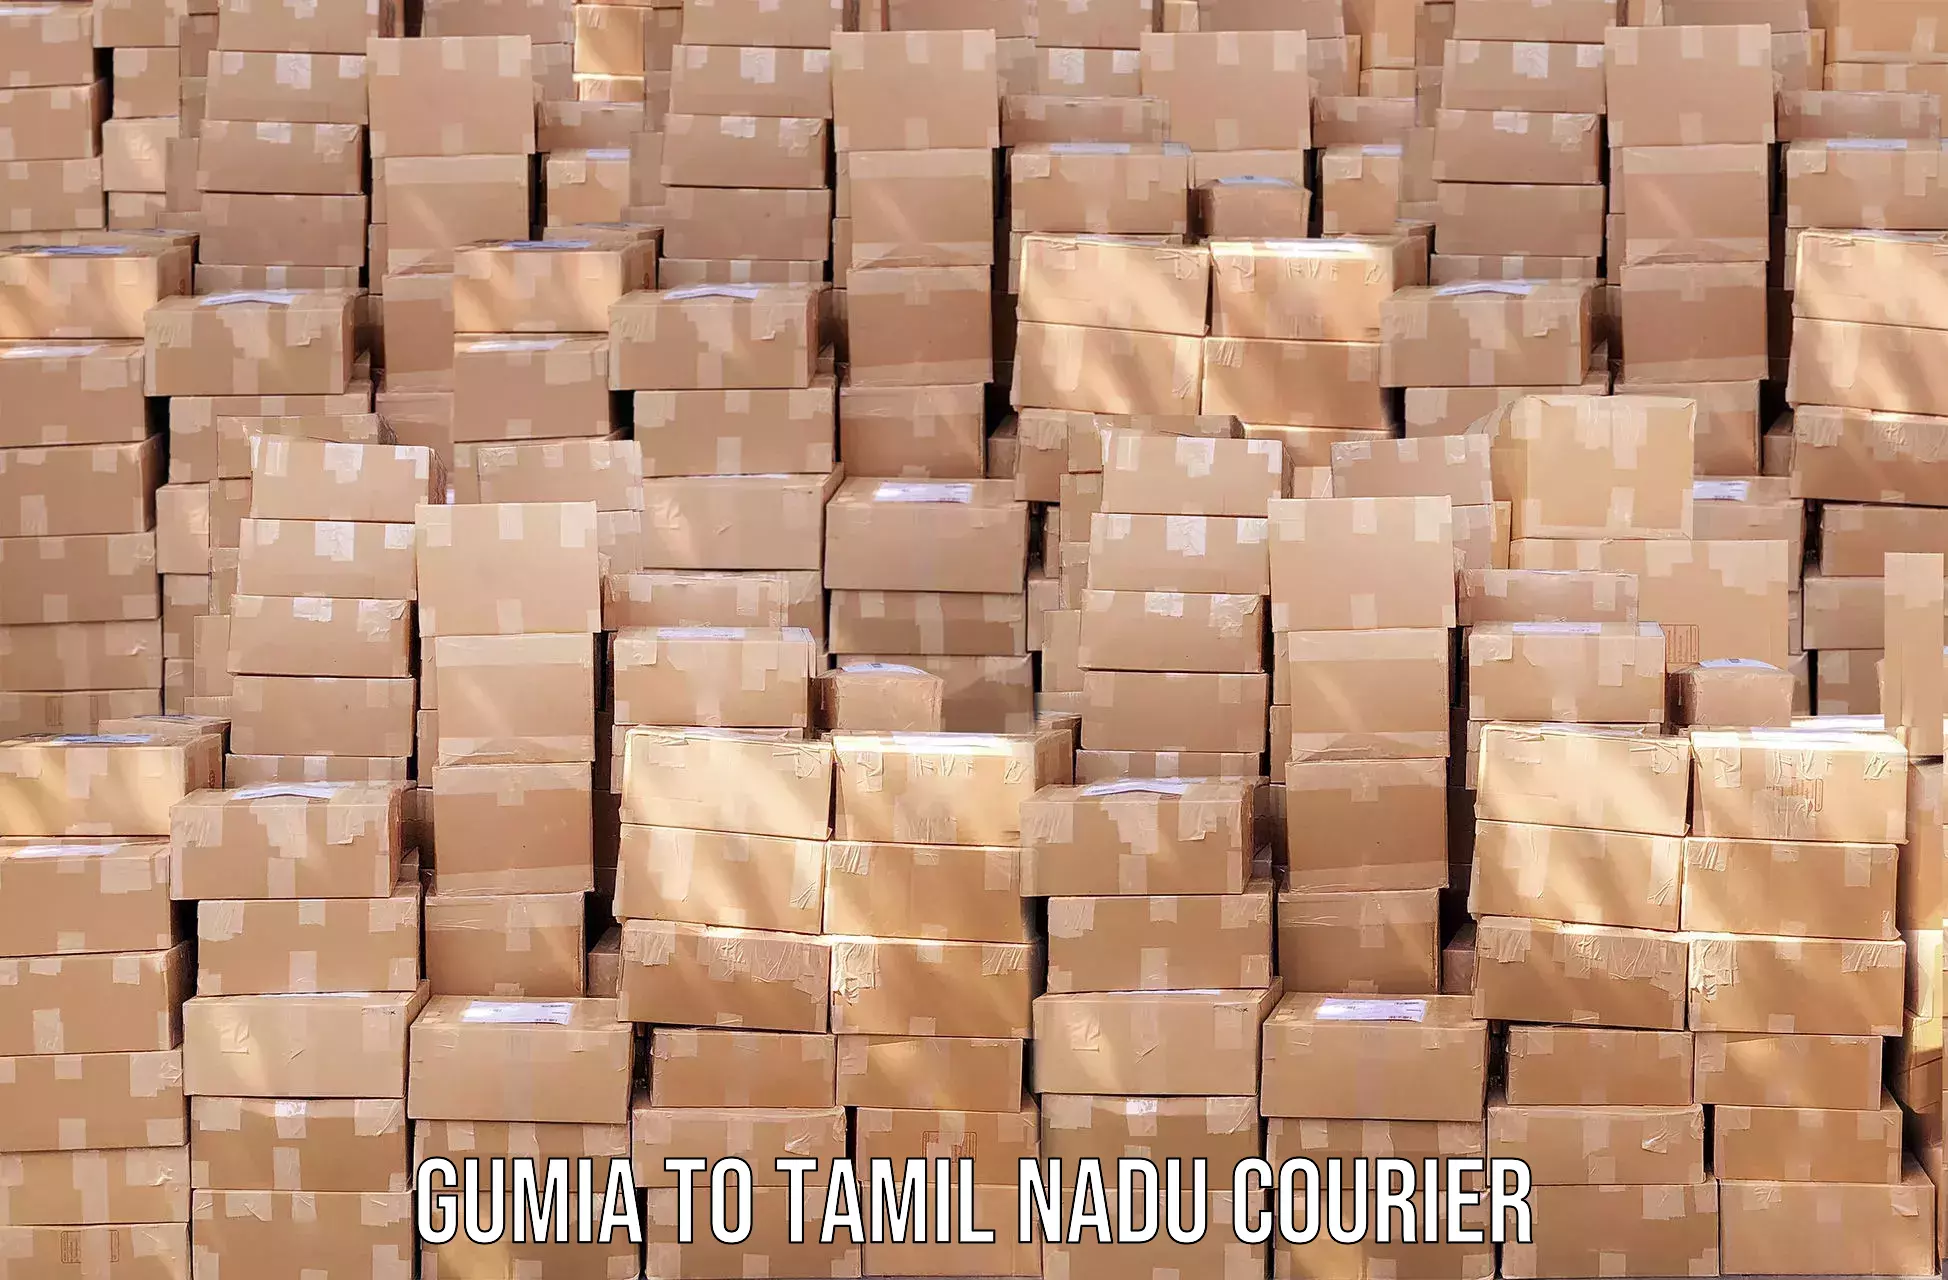 Next-day delivery options Gumia to Rajapalayam